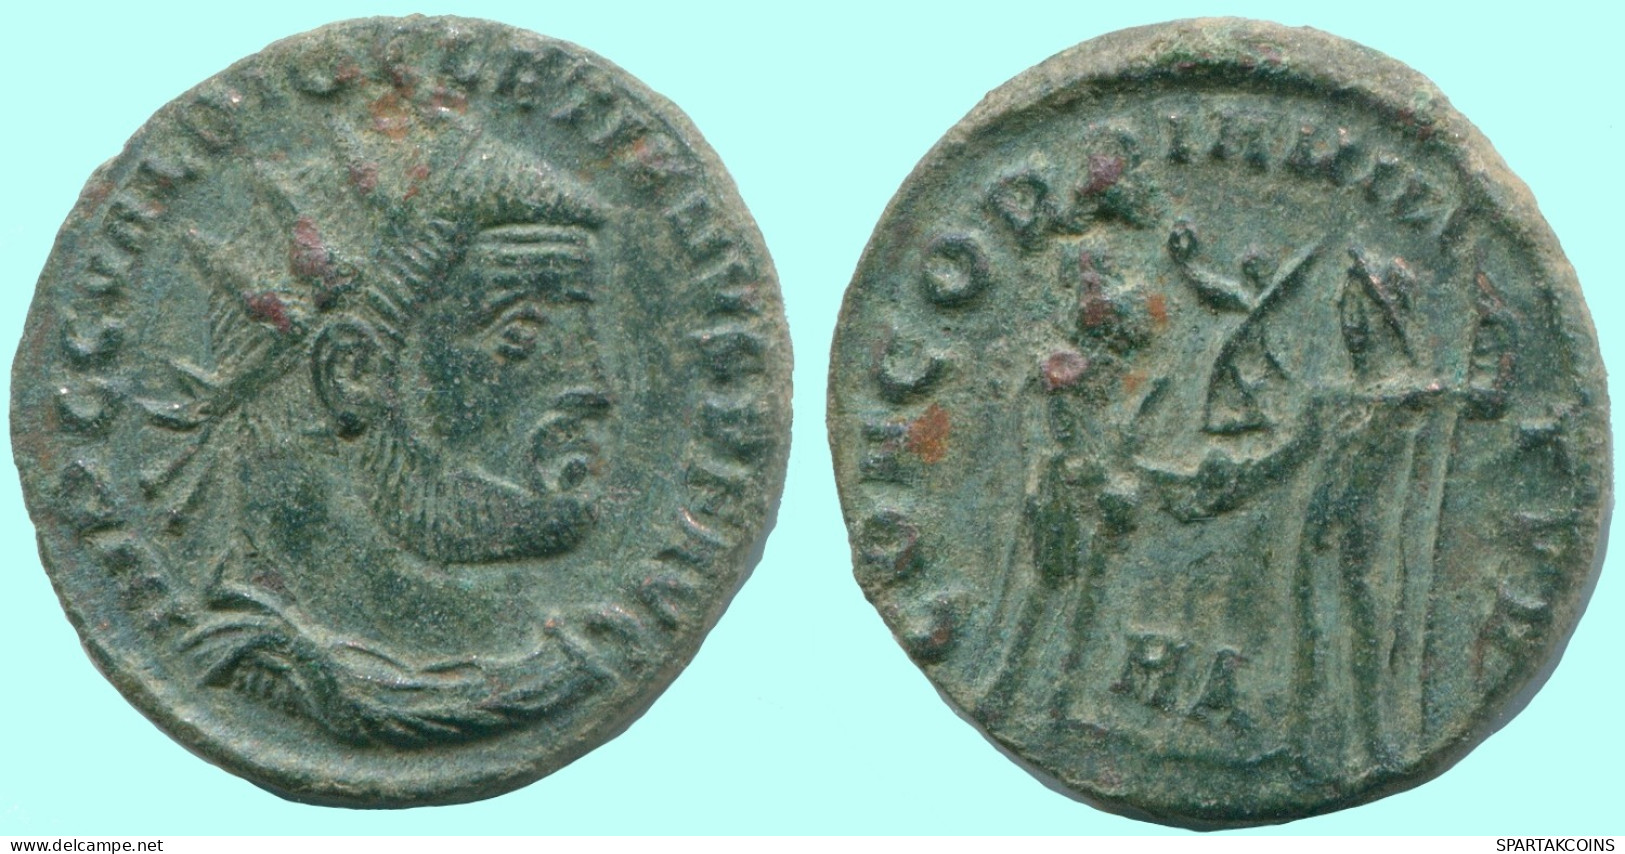 DIOCLETIAN HERACLEA Mint: AD 295/97 CONCORDIA MILITVM 3.2g/20mm #ANC13071.17.U.A - The Tetrarchy (284 AD Tot 307 AD)